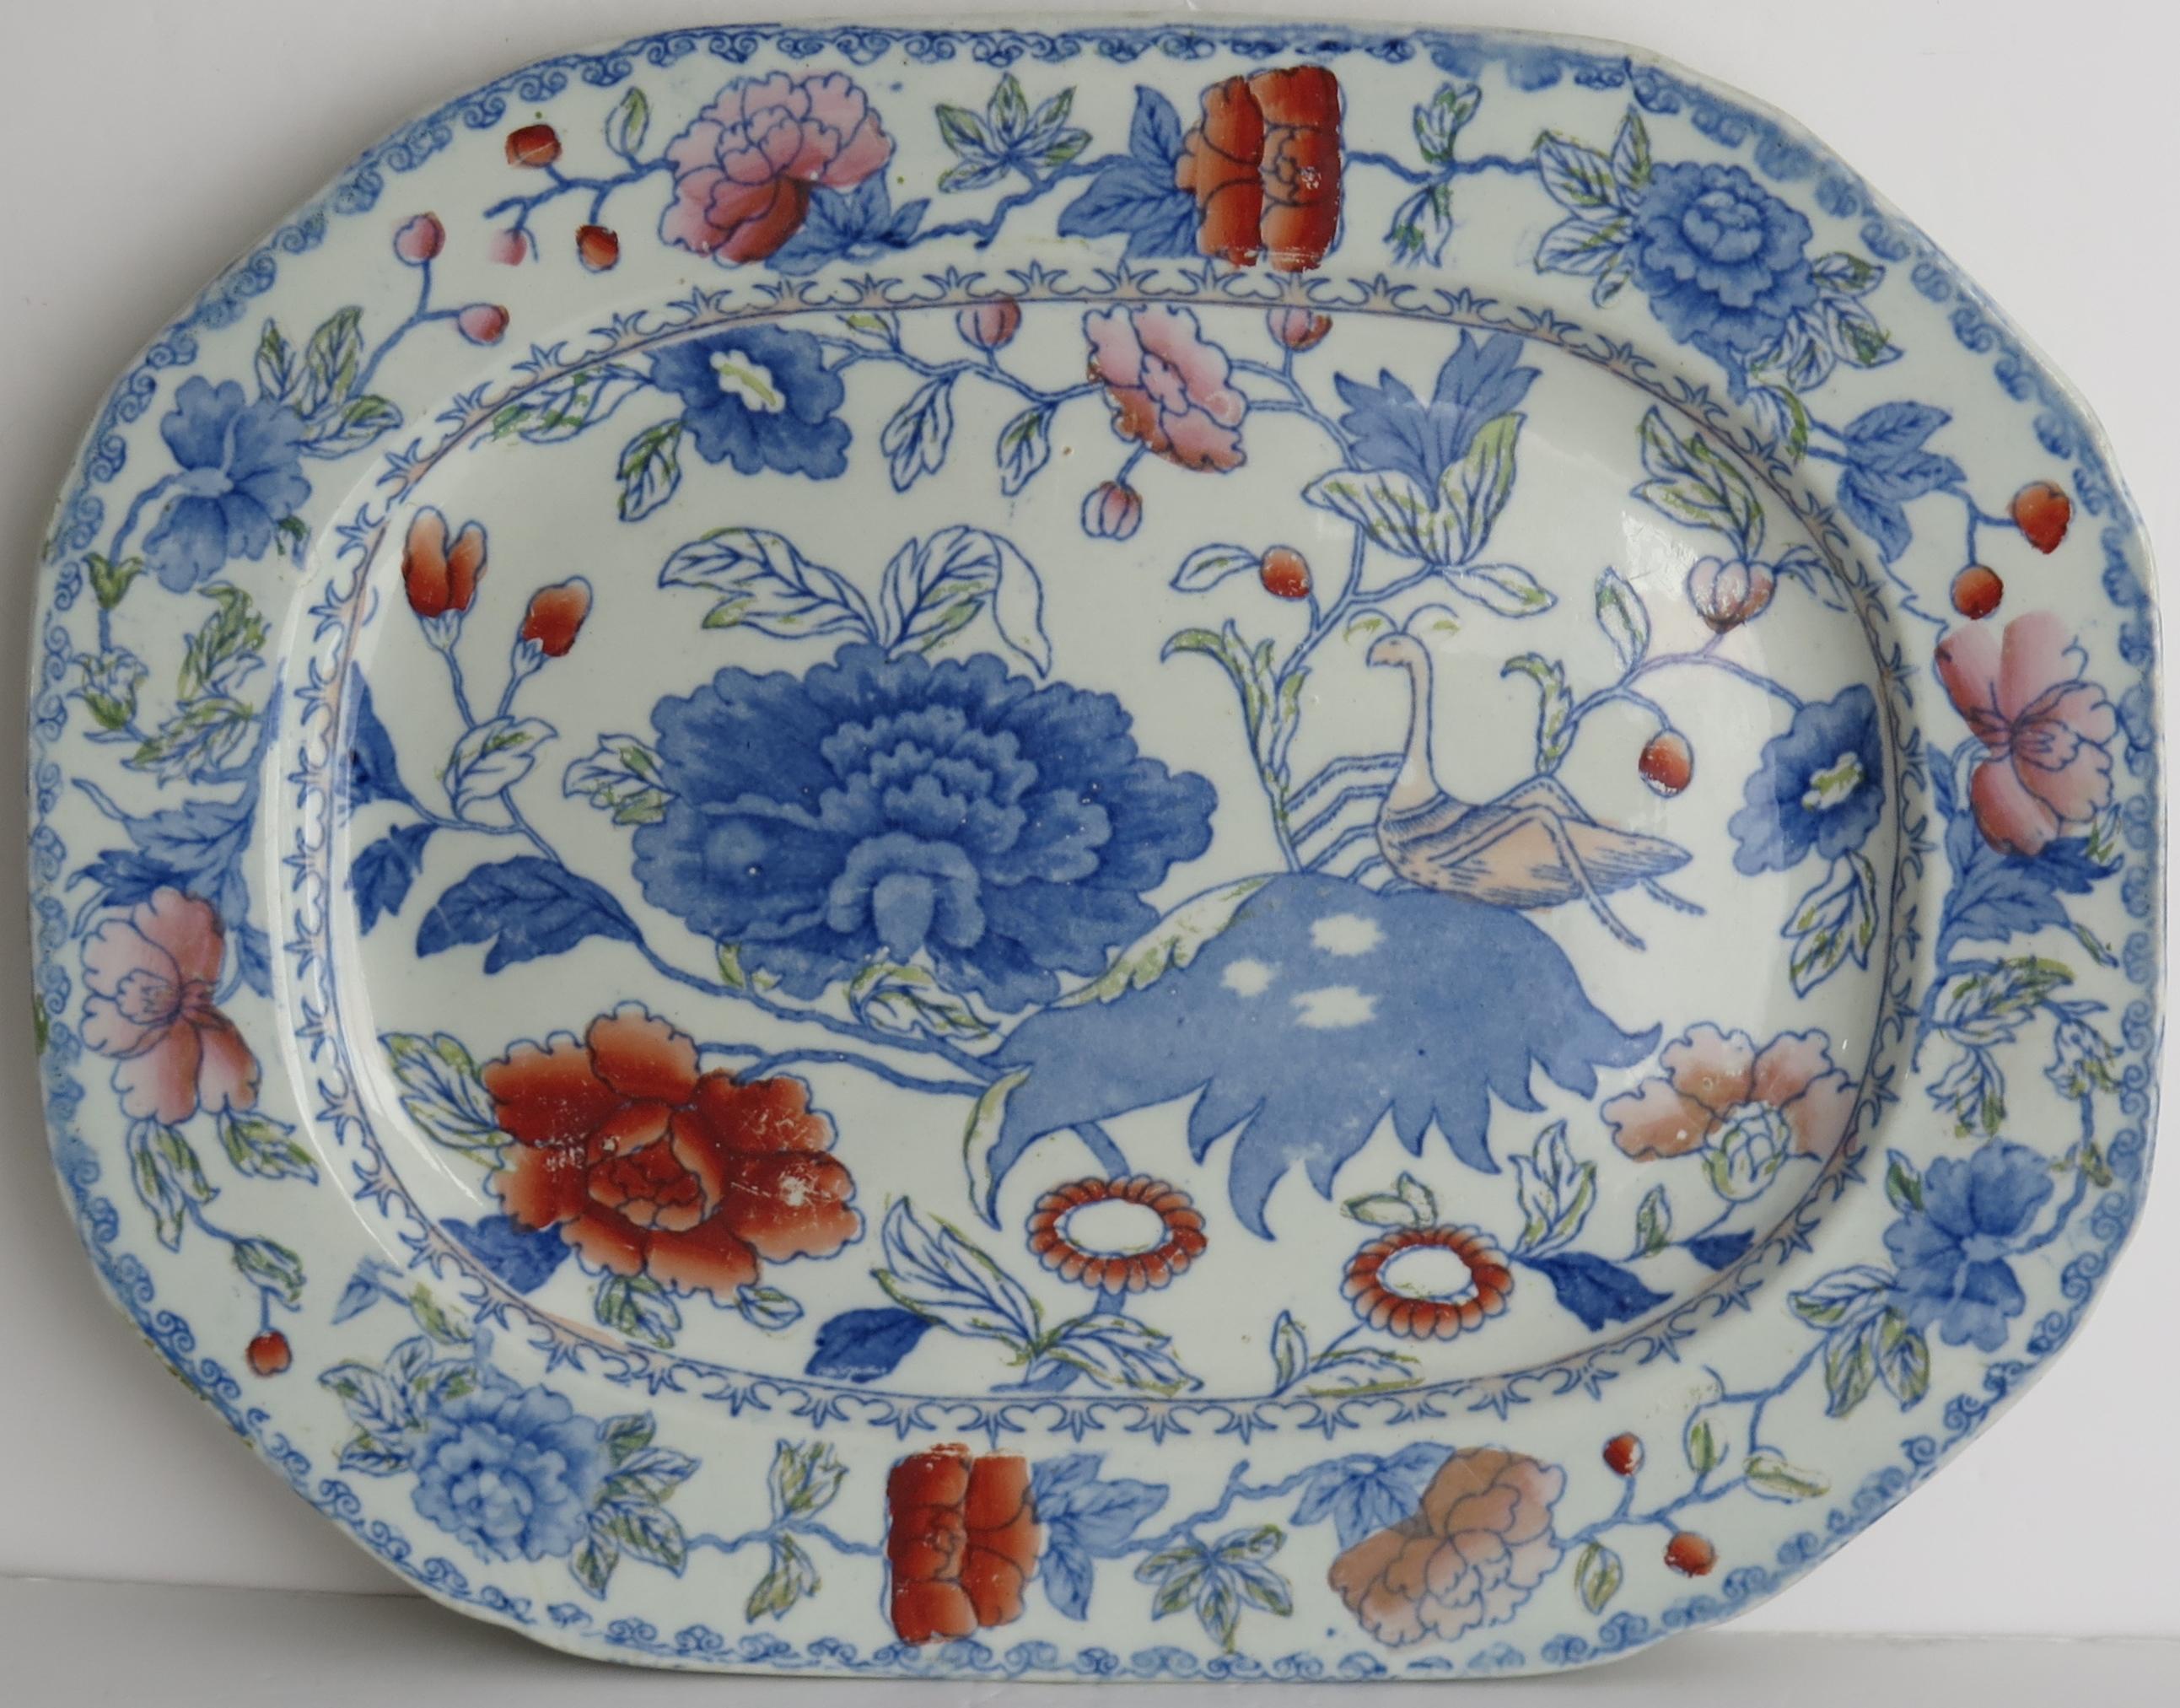 This is a good ironstone ( stone china) large platter, made by Mason's Ironstone circa 1820.

The platter is hand painted, in Mason's 